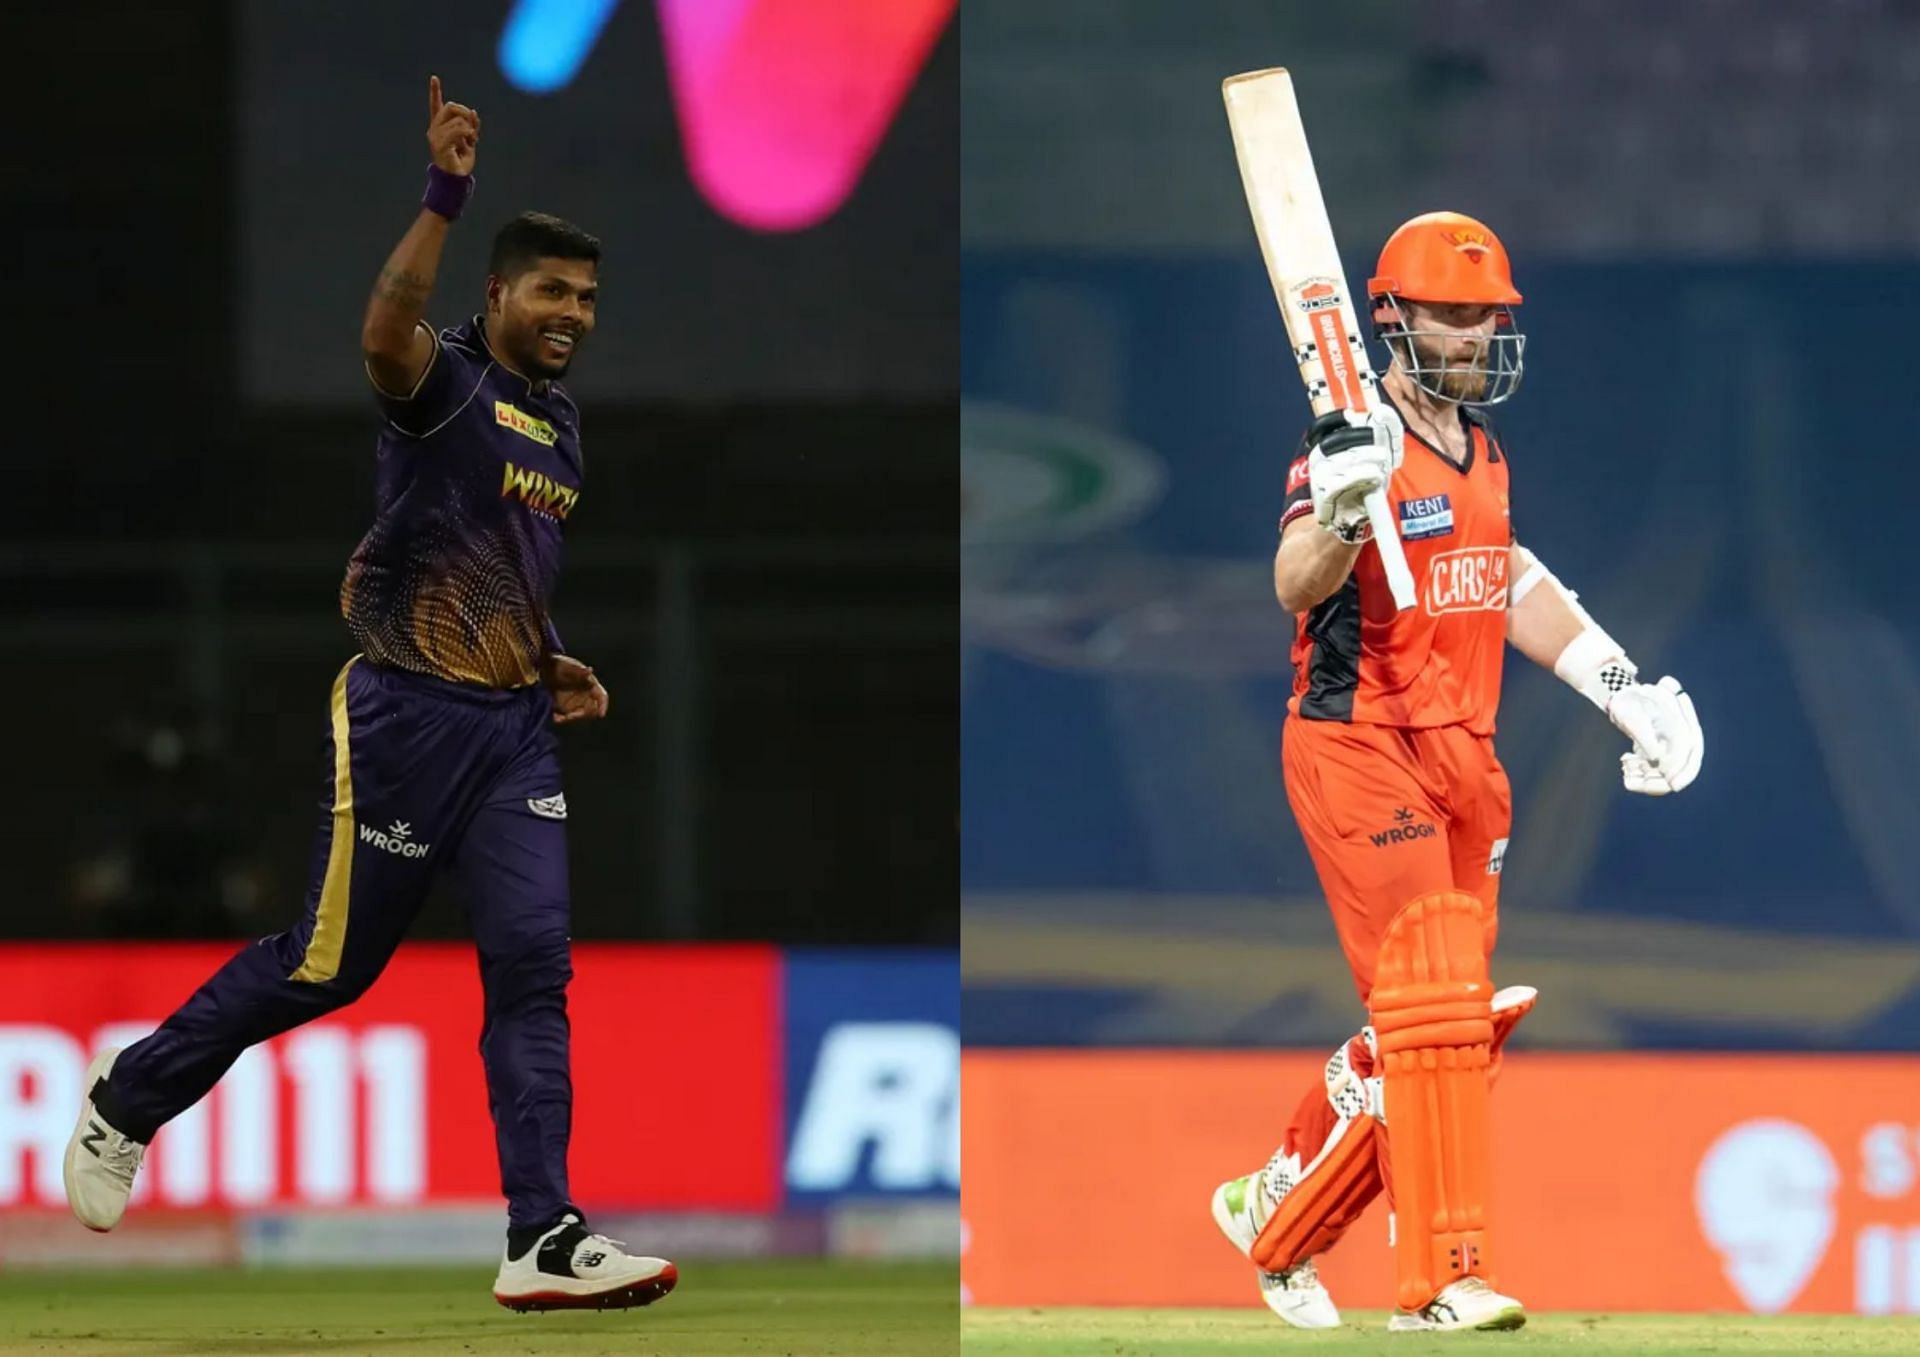 Umesh Yadav against Kane Williamson could have a big say in the end result of the clash between KKR and SRH tonight (Picture Credits: IPL).